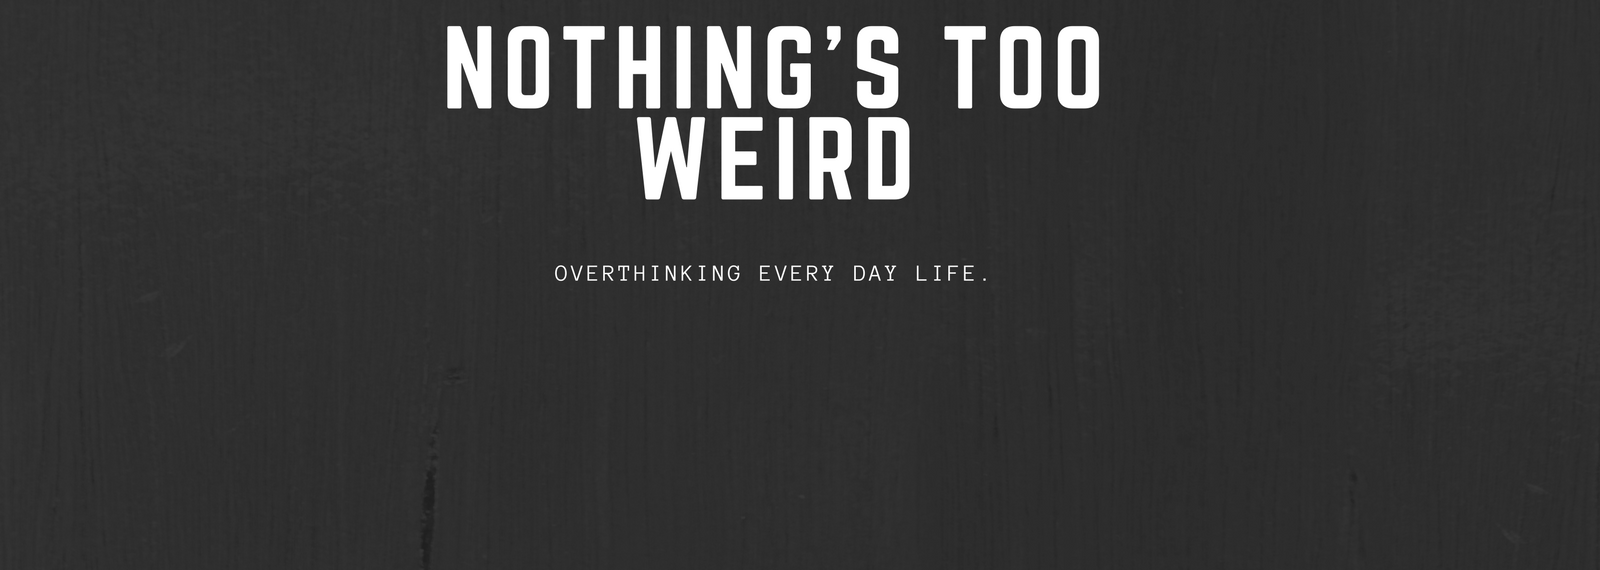 Nothing's Too Weird